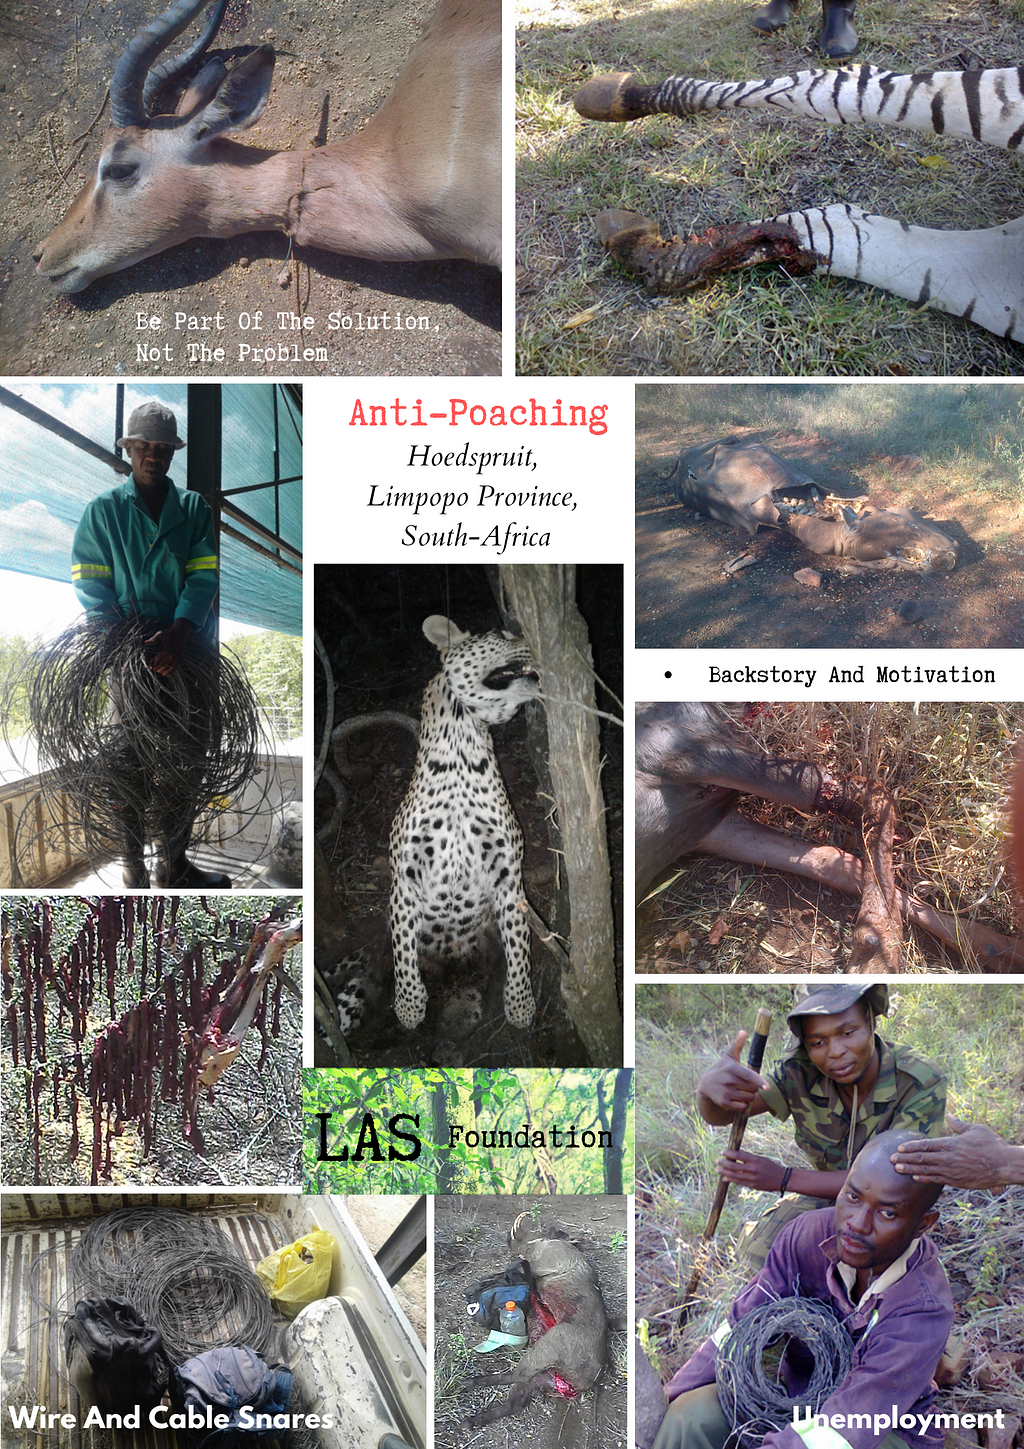 A collage compiled to showcase the effects of illegal poaching activities